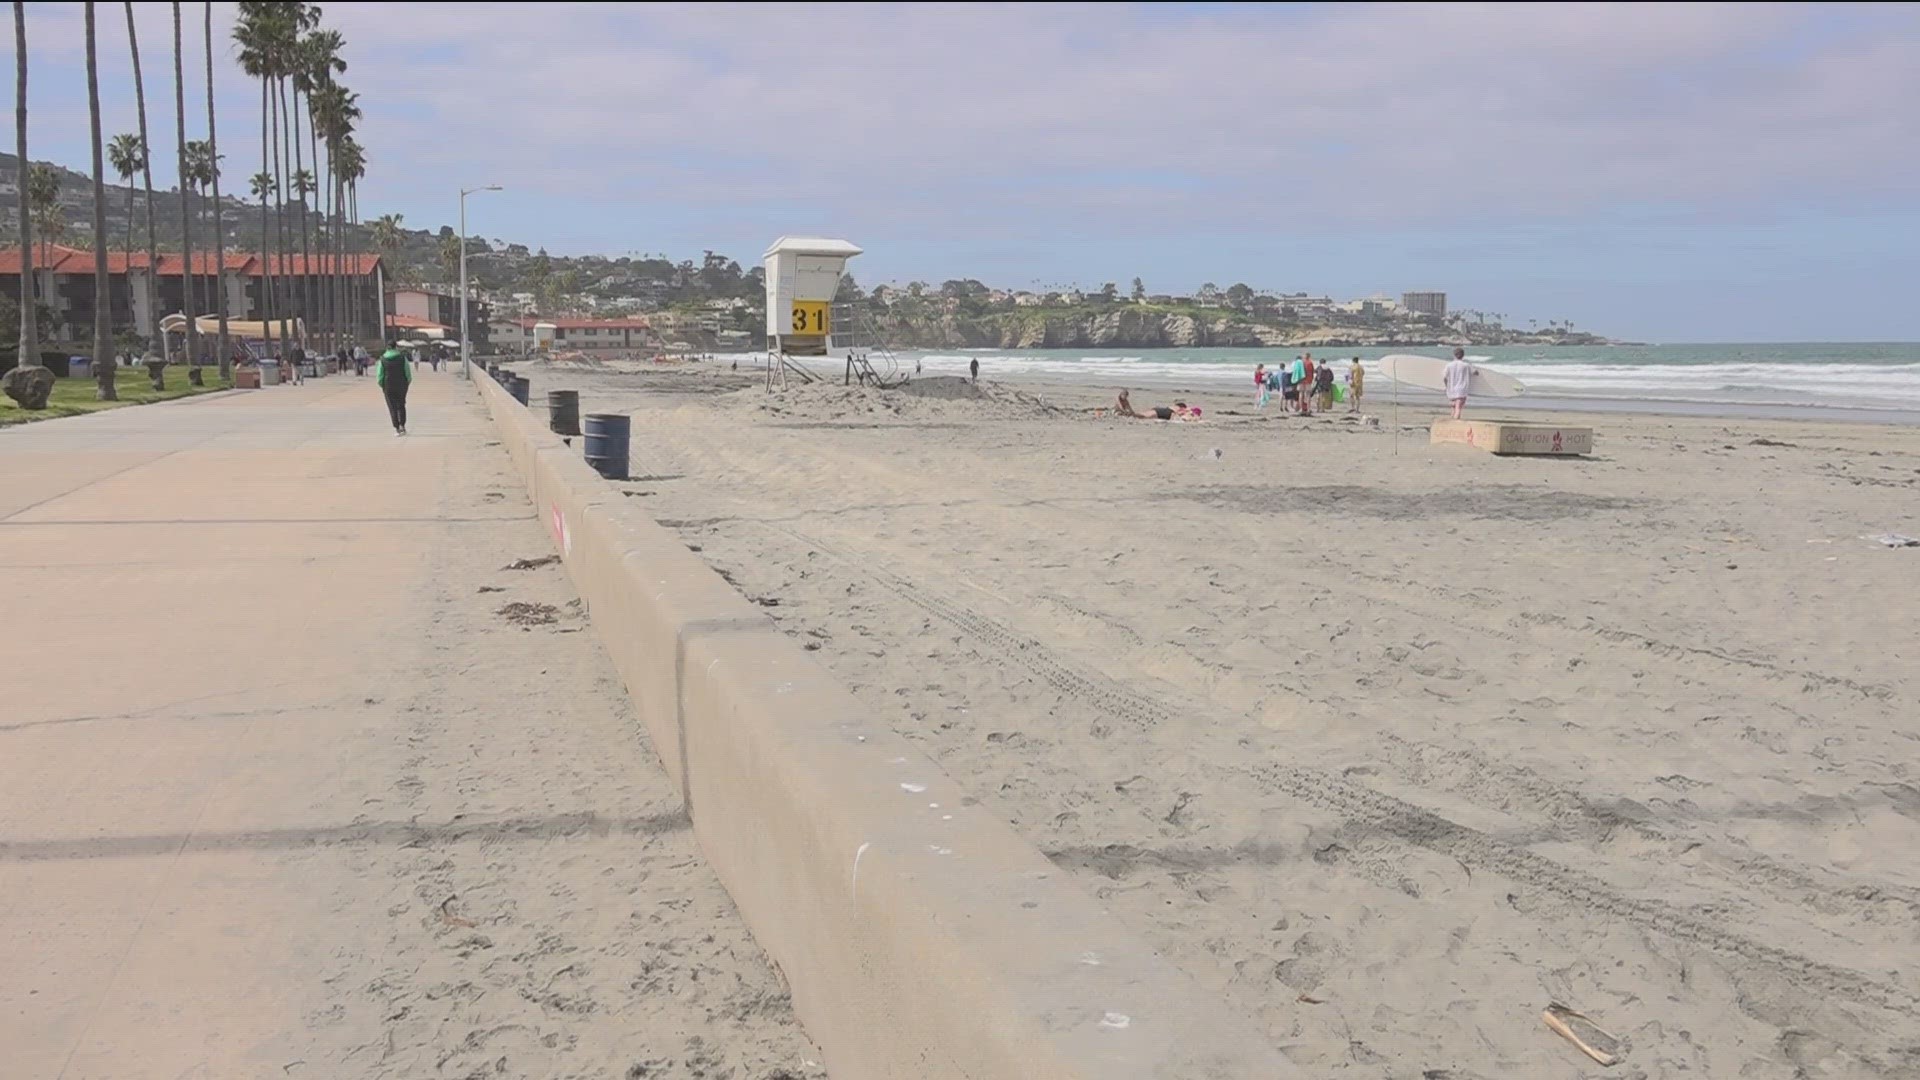 The city says this follows complaints from beachgoers and people living near the beach who say the events are loud and take away space meant for everyone to share.